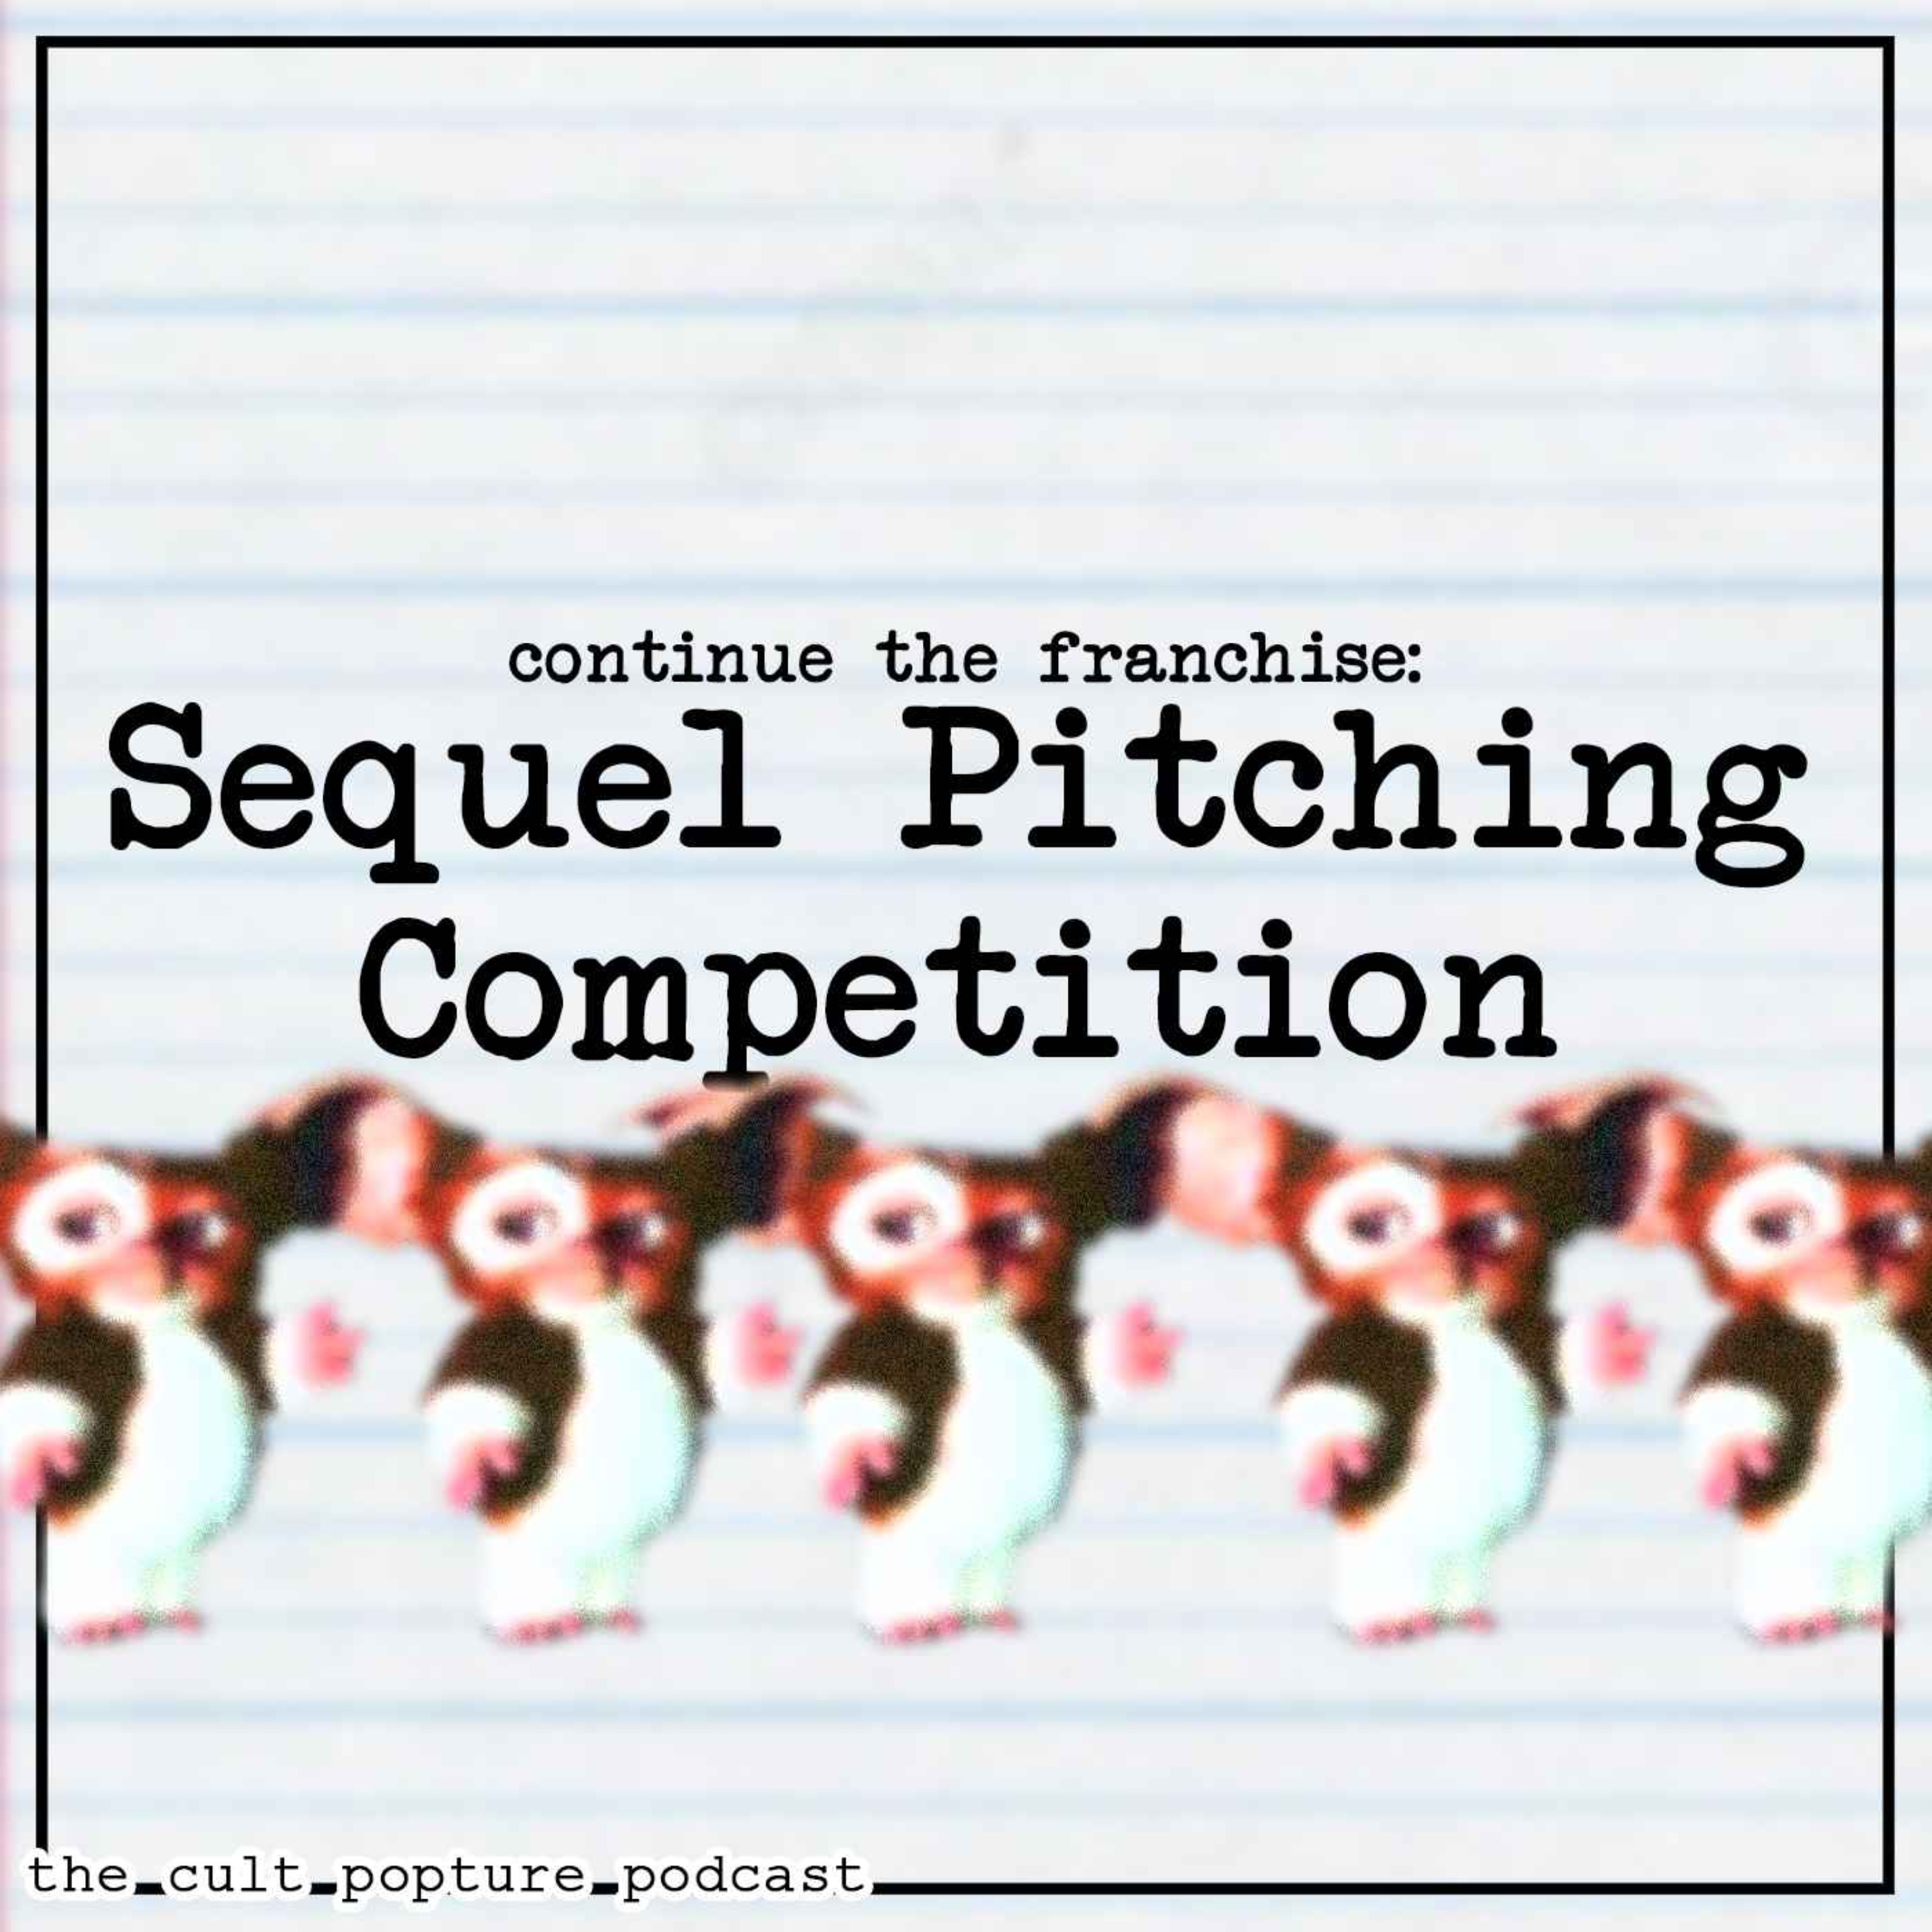 Sequel Pitching Competition | The Cult Popture Podcast